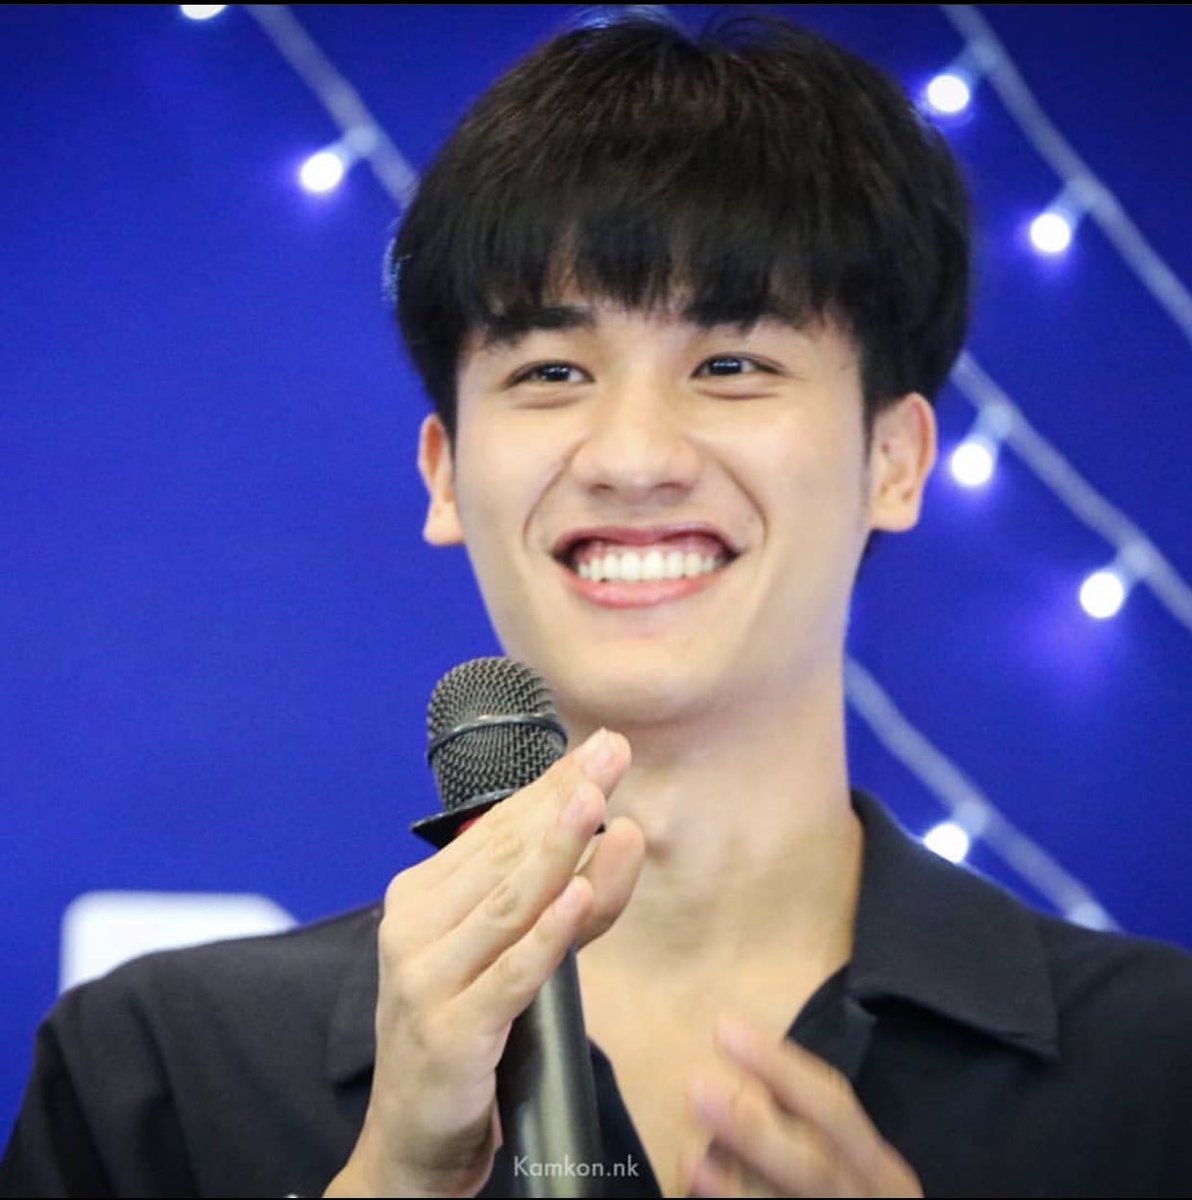 our days aren't complete without his gummy smiles  #Tawan_V  @Tawan_V